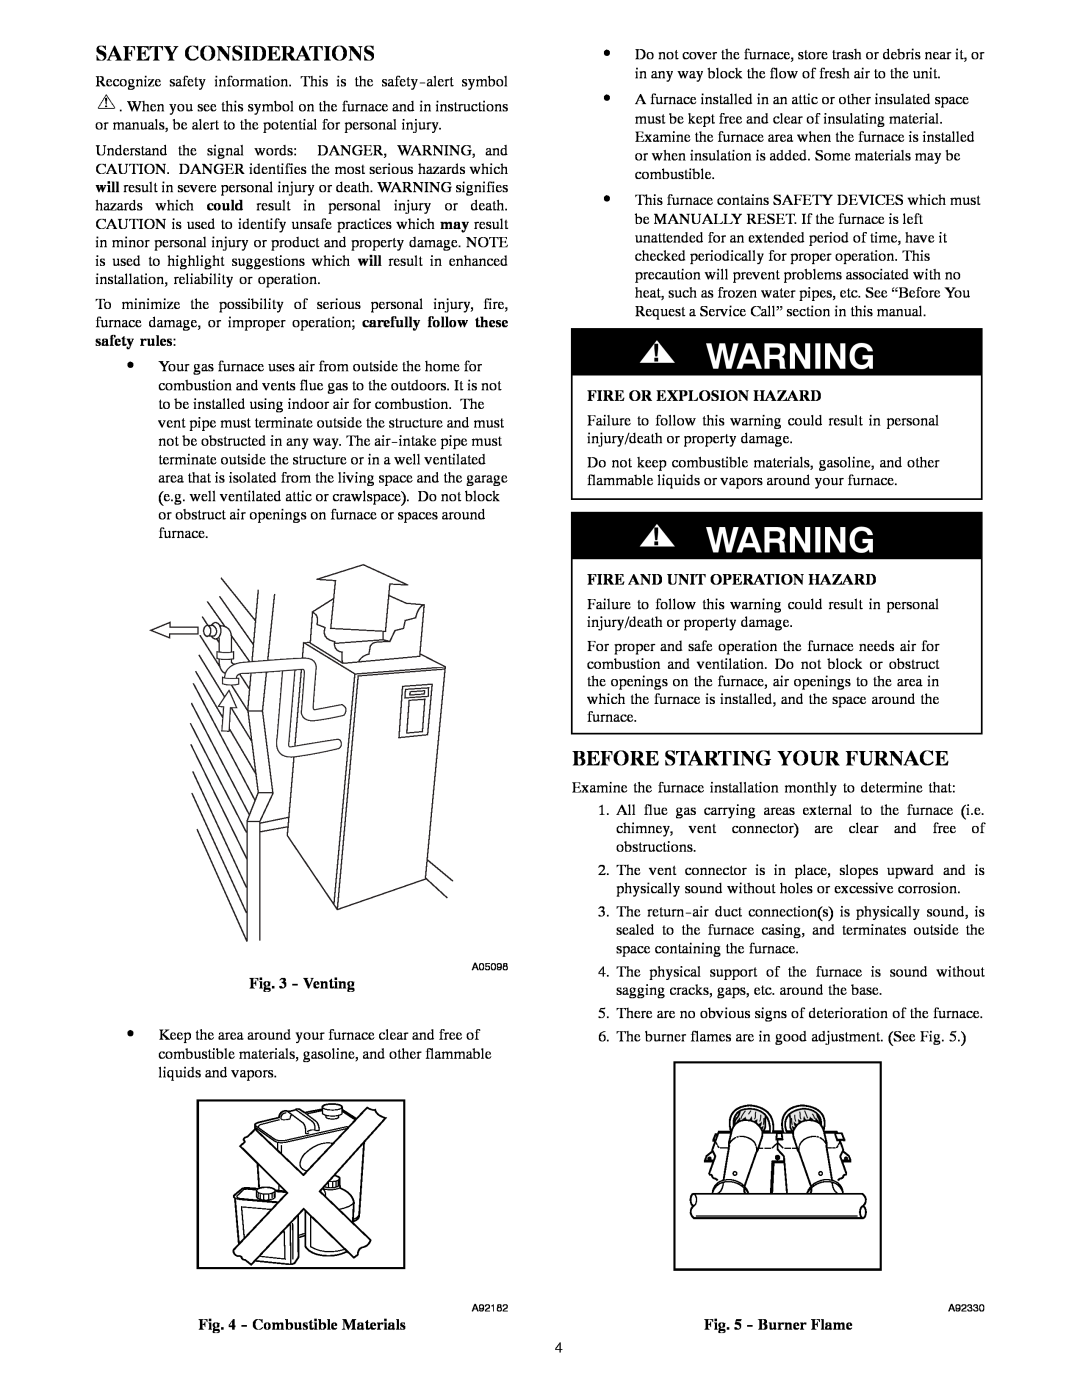 Carrier 58UVB manual Safety Considerations, Before Starting Your Furnace, Venting, Combustible Materials, Burner Flame 